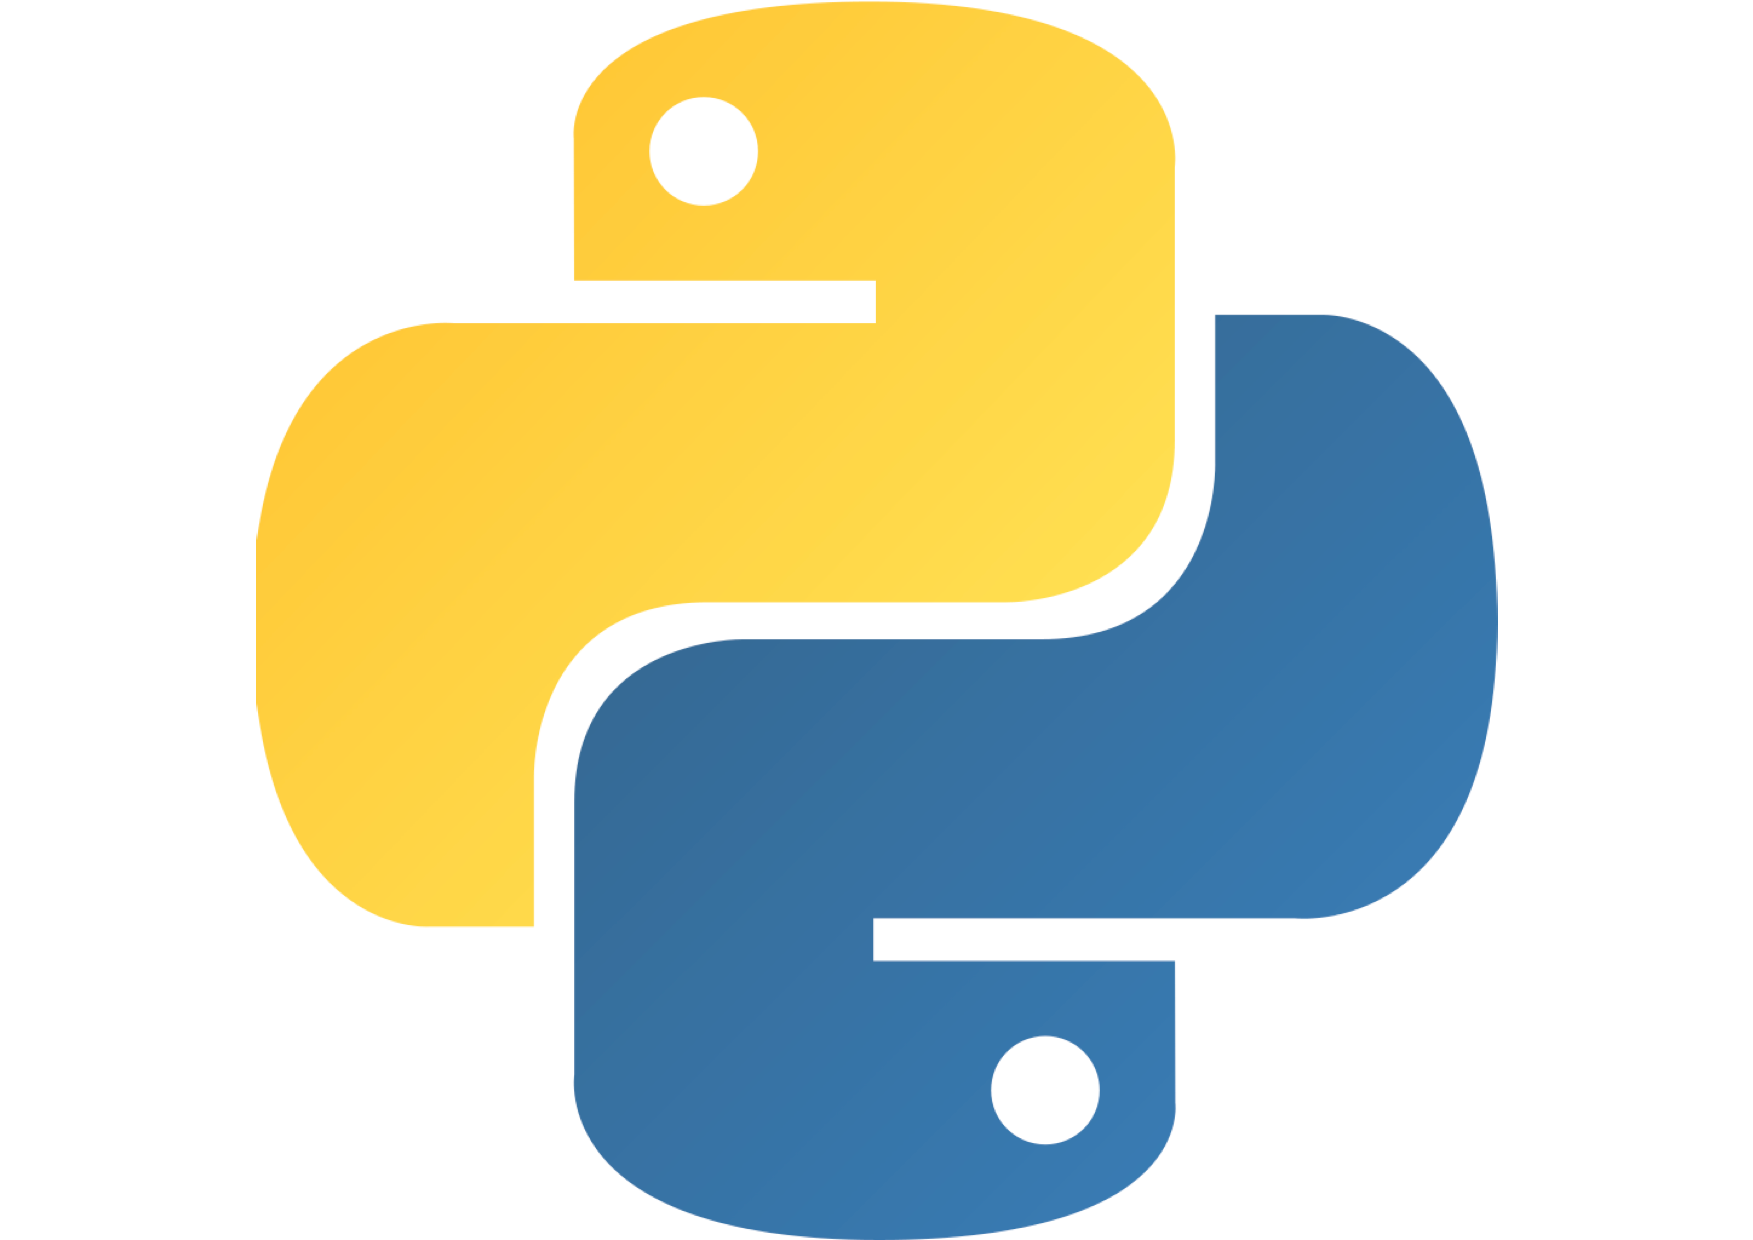 An image of the official Python symbol.